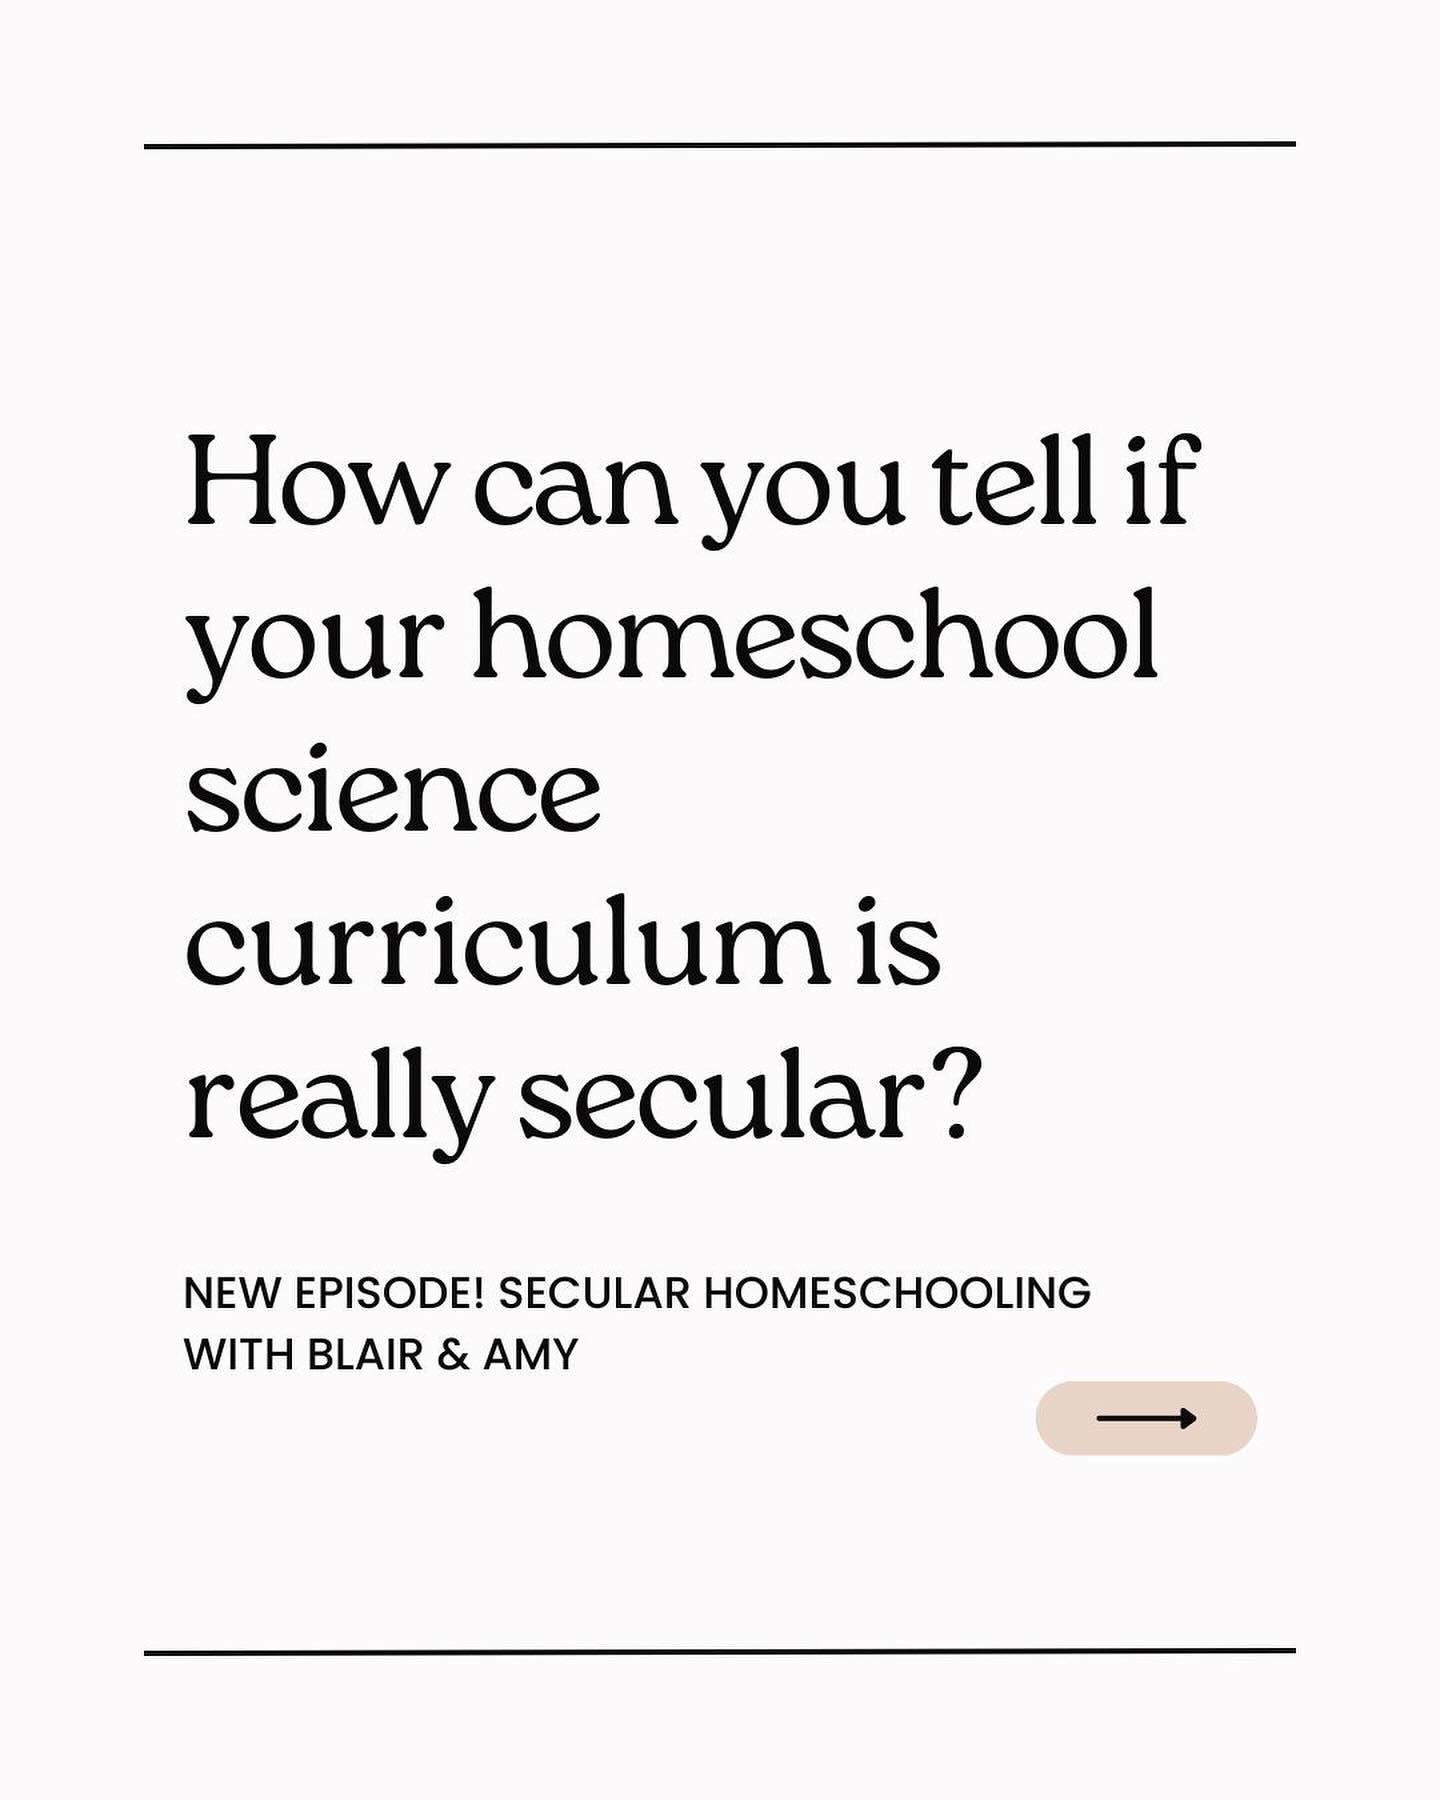 Raise your hand if you ever accidentally bought a non-secular science curriculum&hellip; 🙋 

Honestly, coming into homeschooling for non-religious reasons, I did NOT expect to have to vet every single curriculum someone recommended. I was wrong.

In